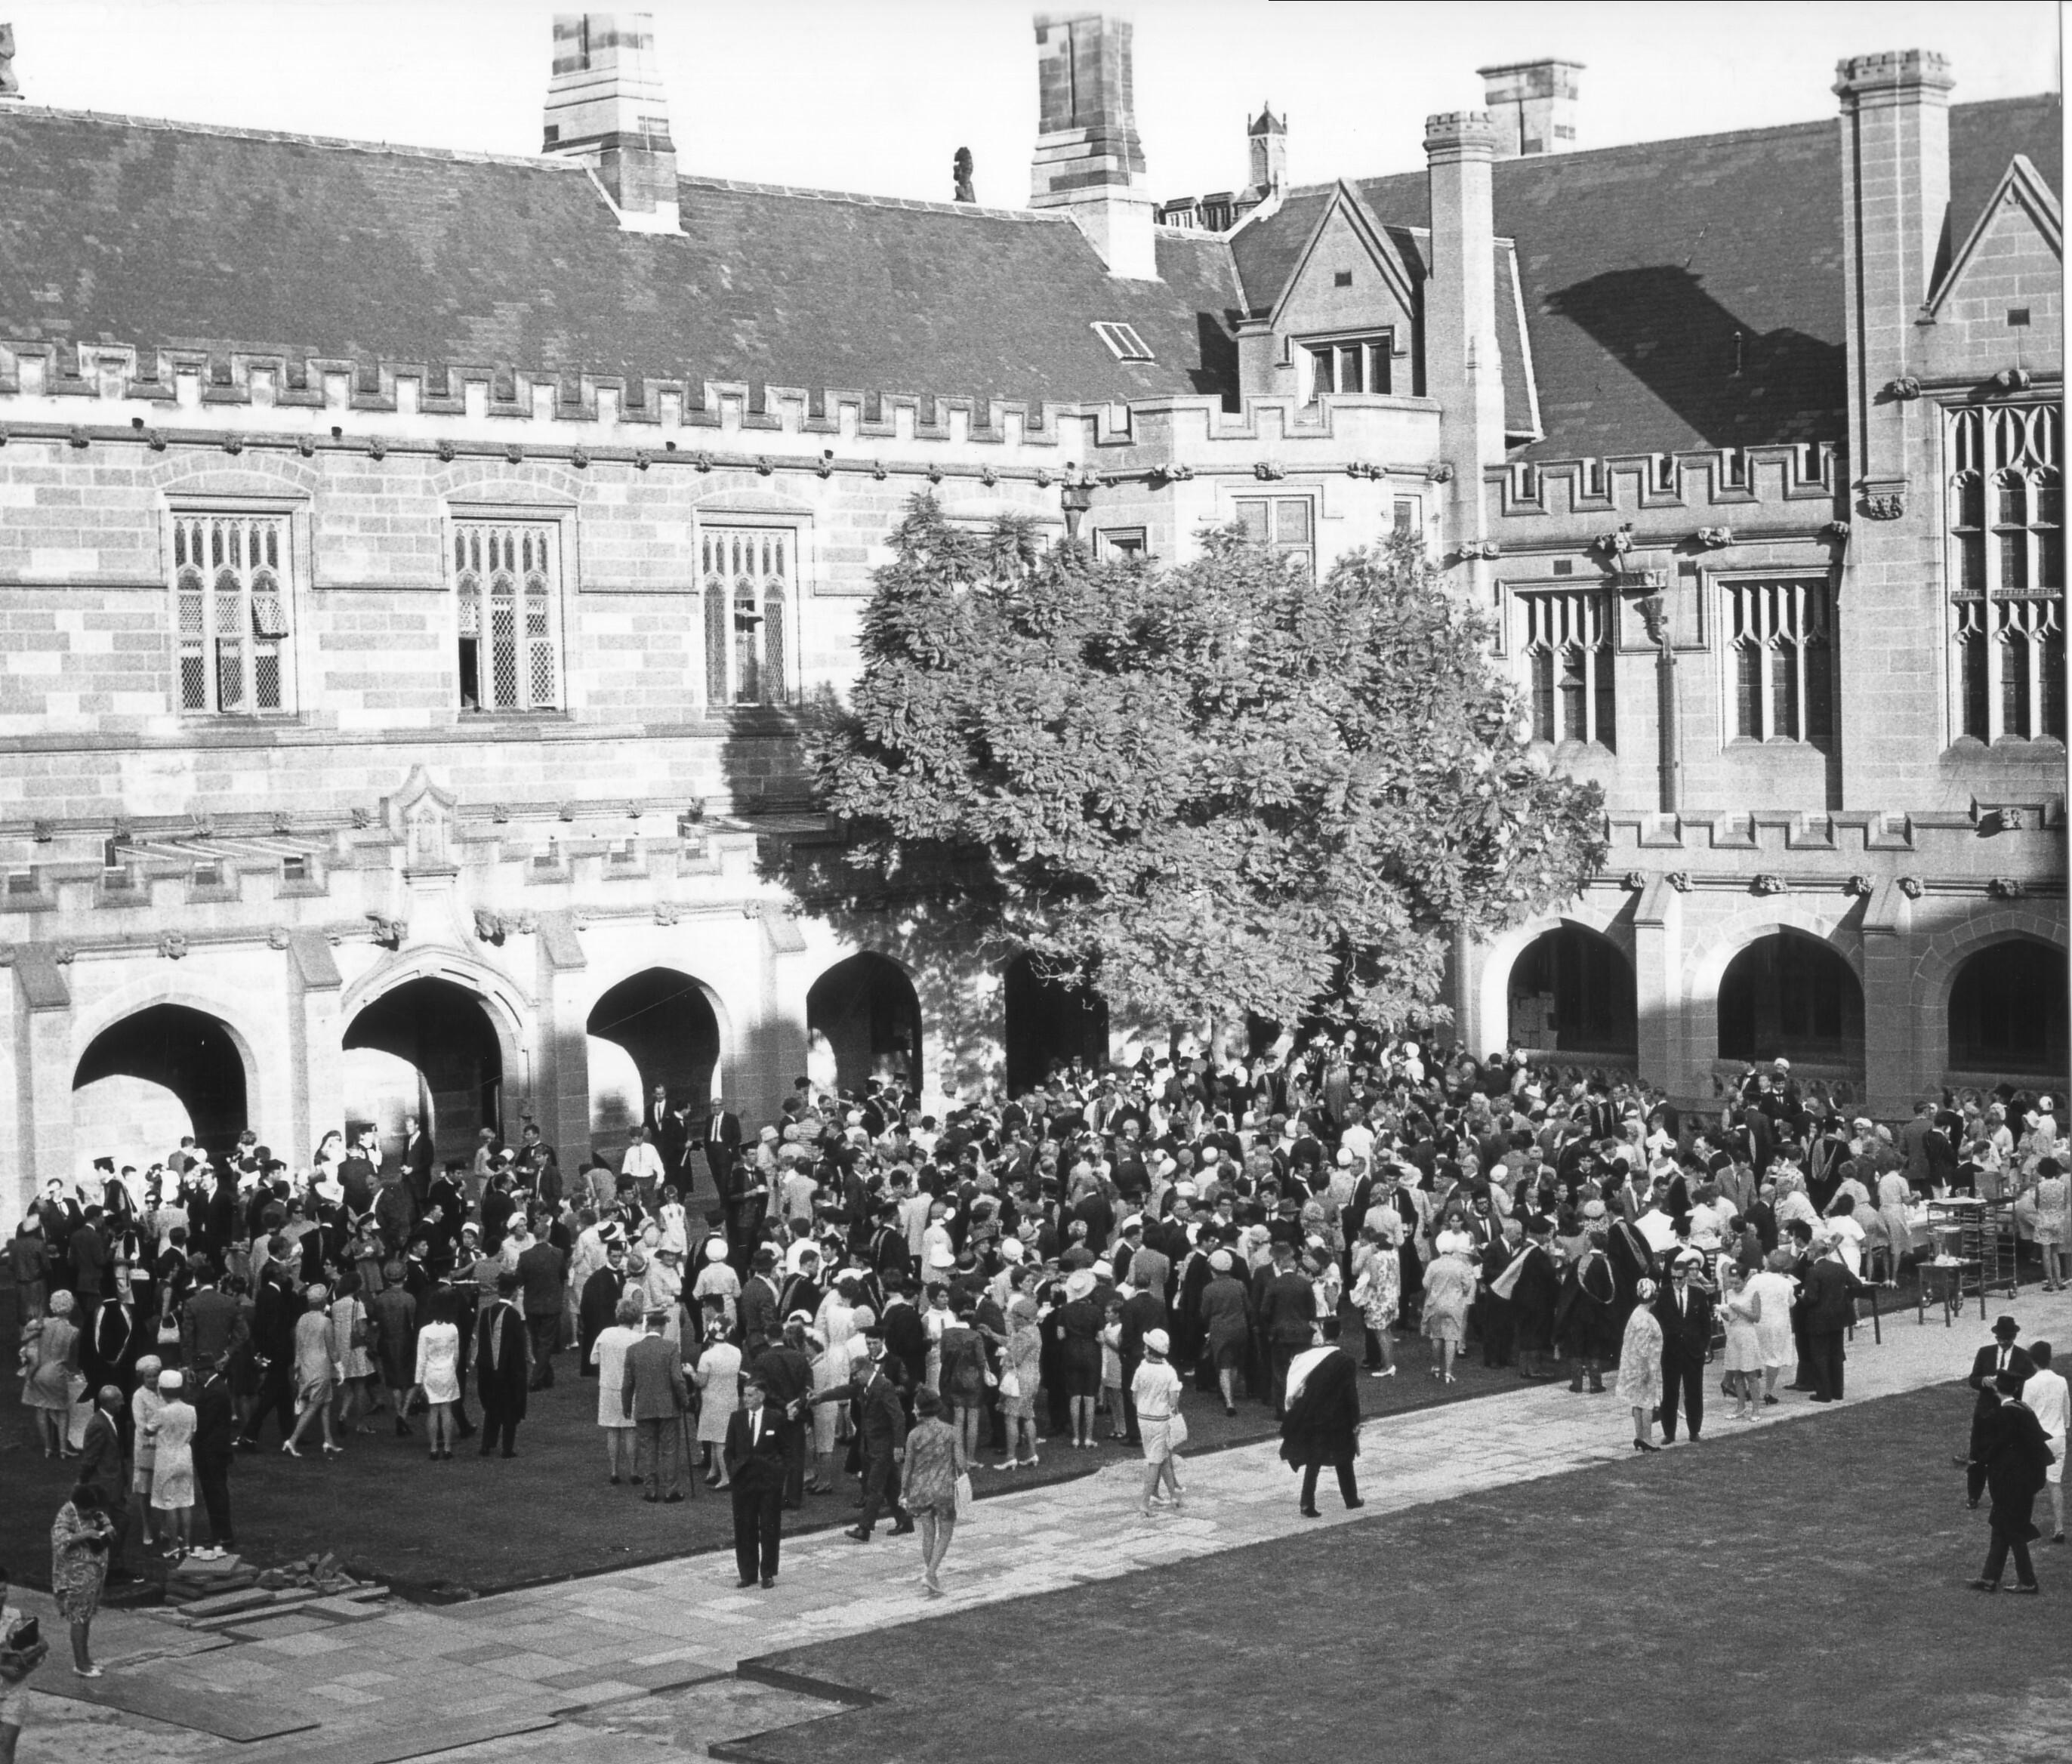 PHOTOGRAPHS OF THE VISIT OF THE GOVERNOR OF NSW, SIR RODEN CUTLER, FOR GRADUATION CEREMONY